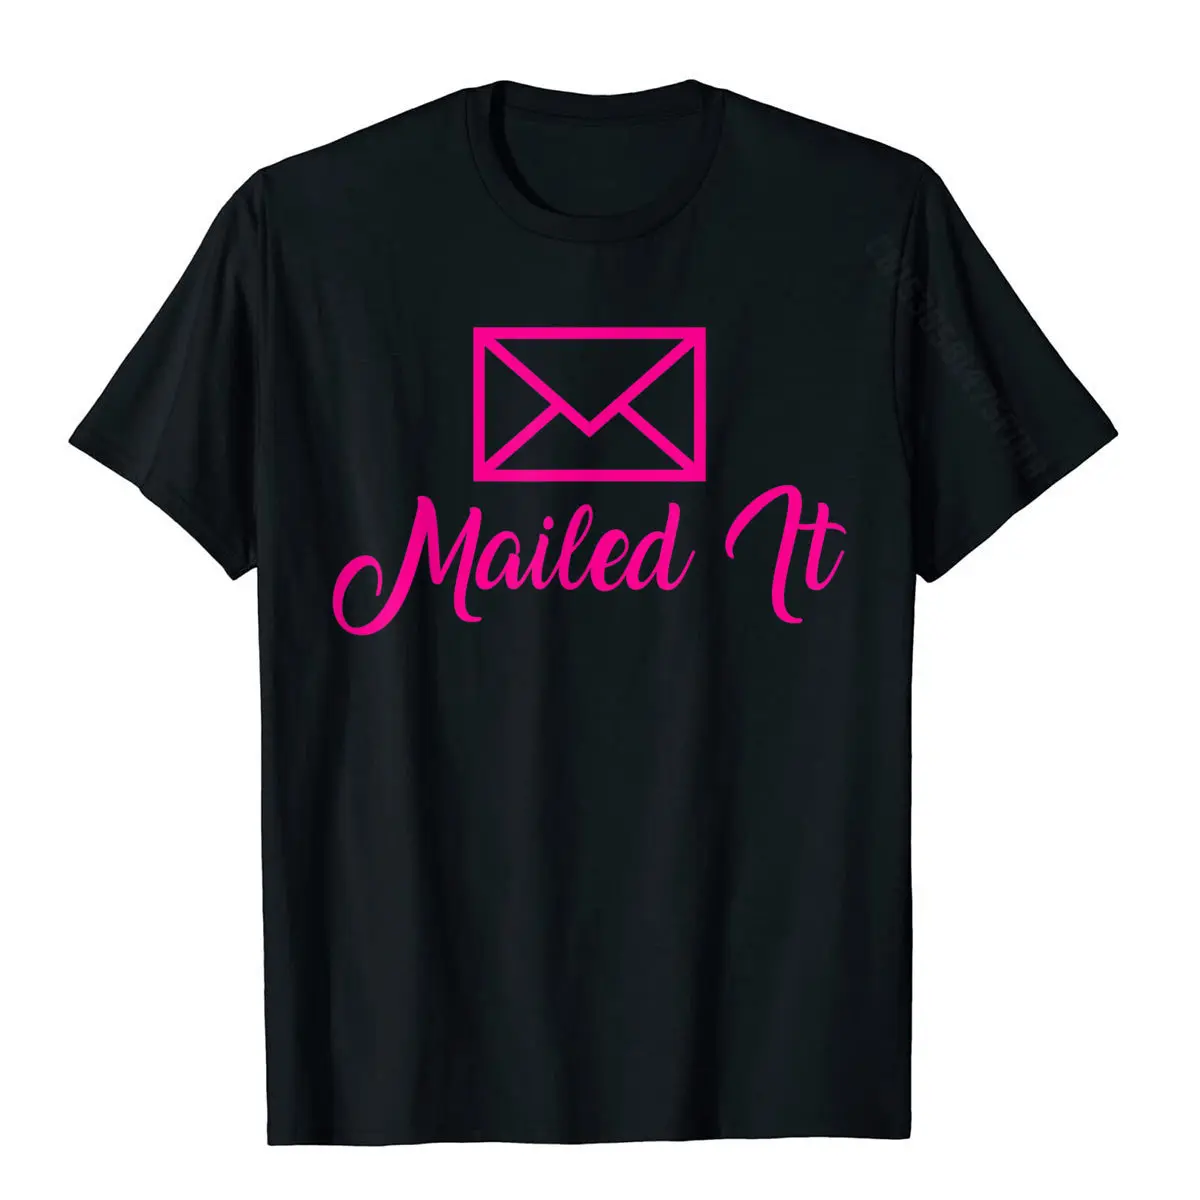 

Funny Girls Mailman Mailed It Post Office Mail Postman Gift T-Shirt Summer Men's Tshirts Graphic Cotton Tops Tees Leisure